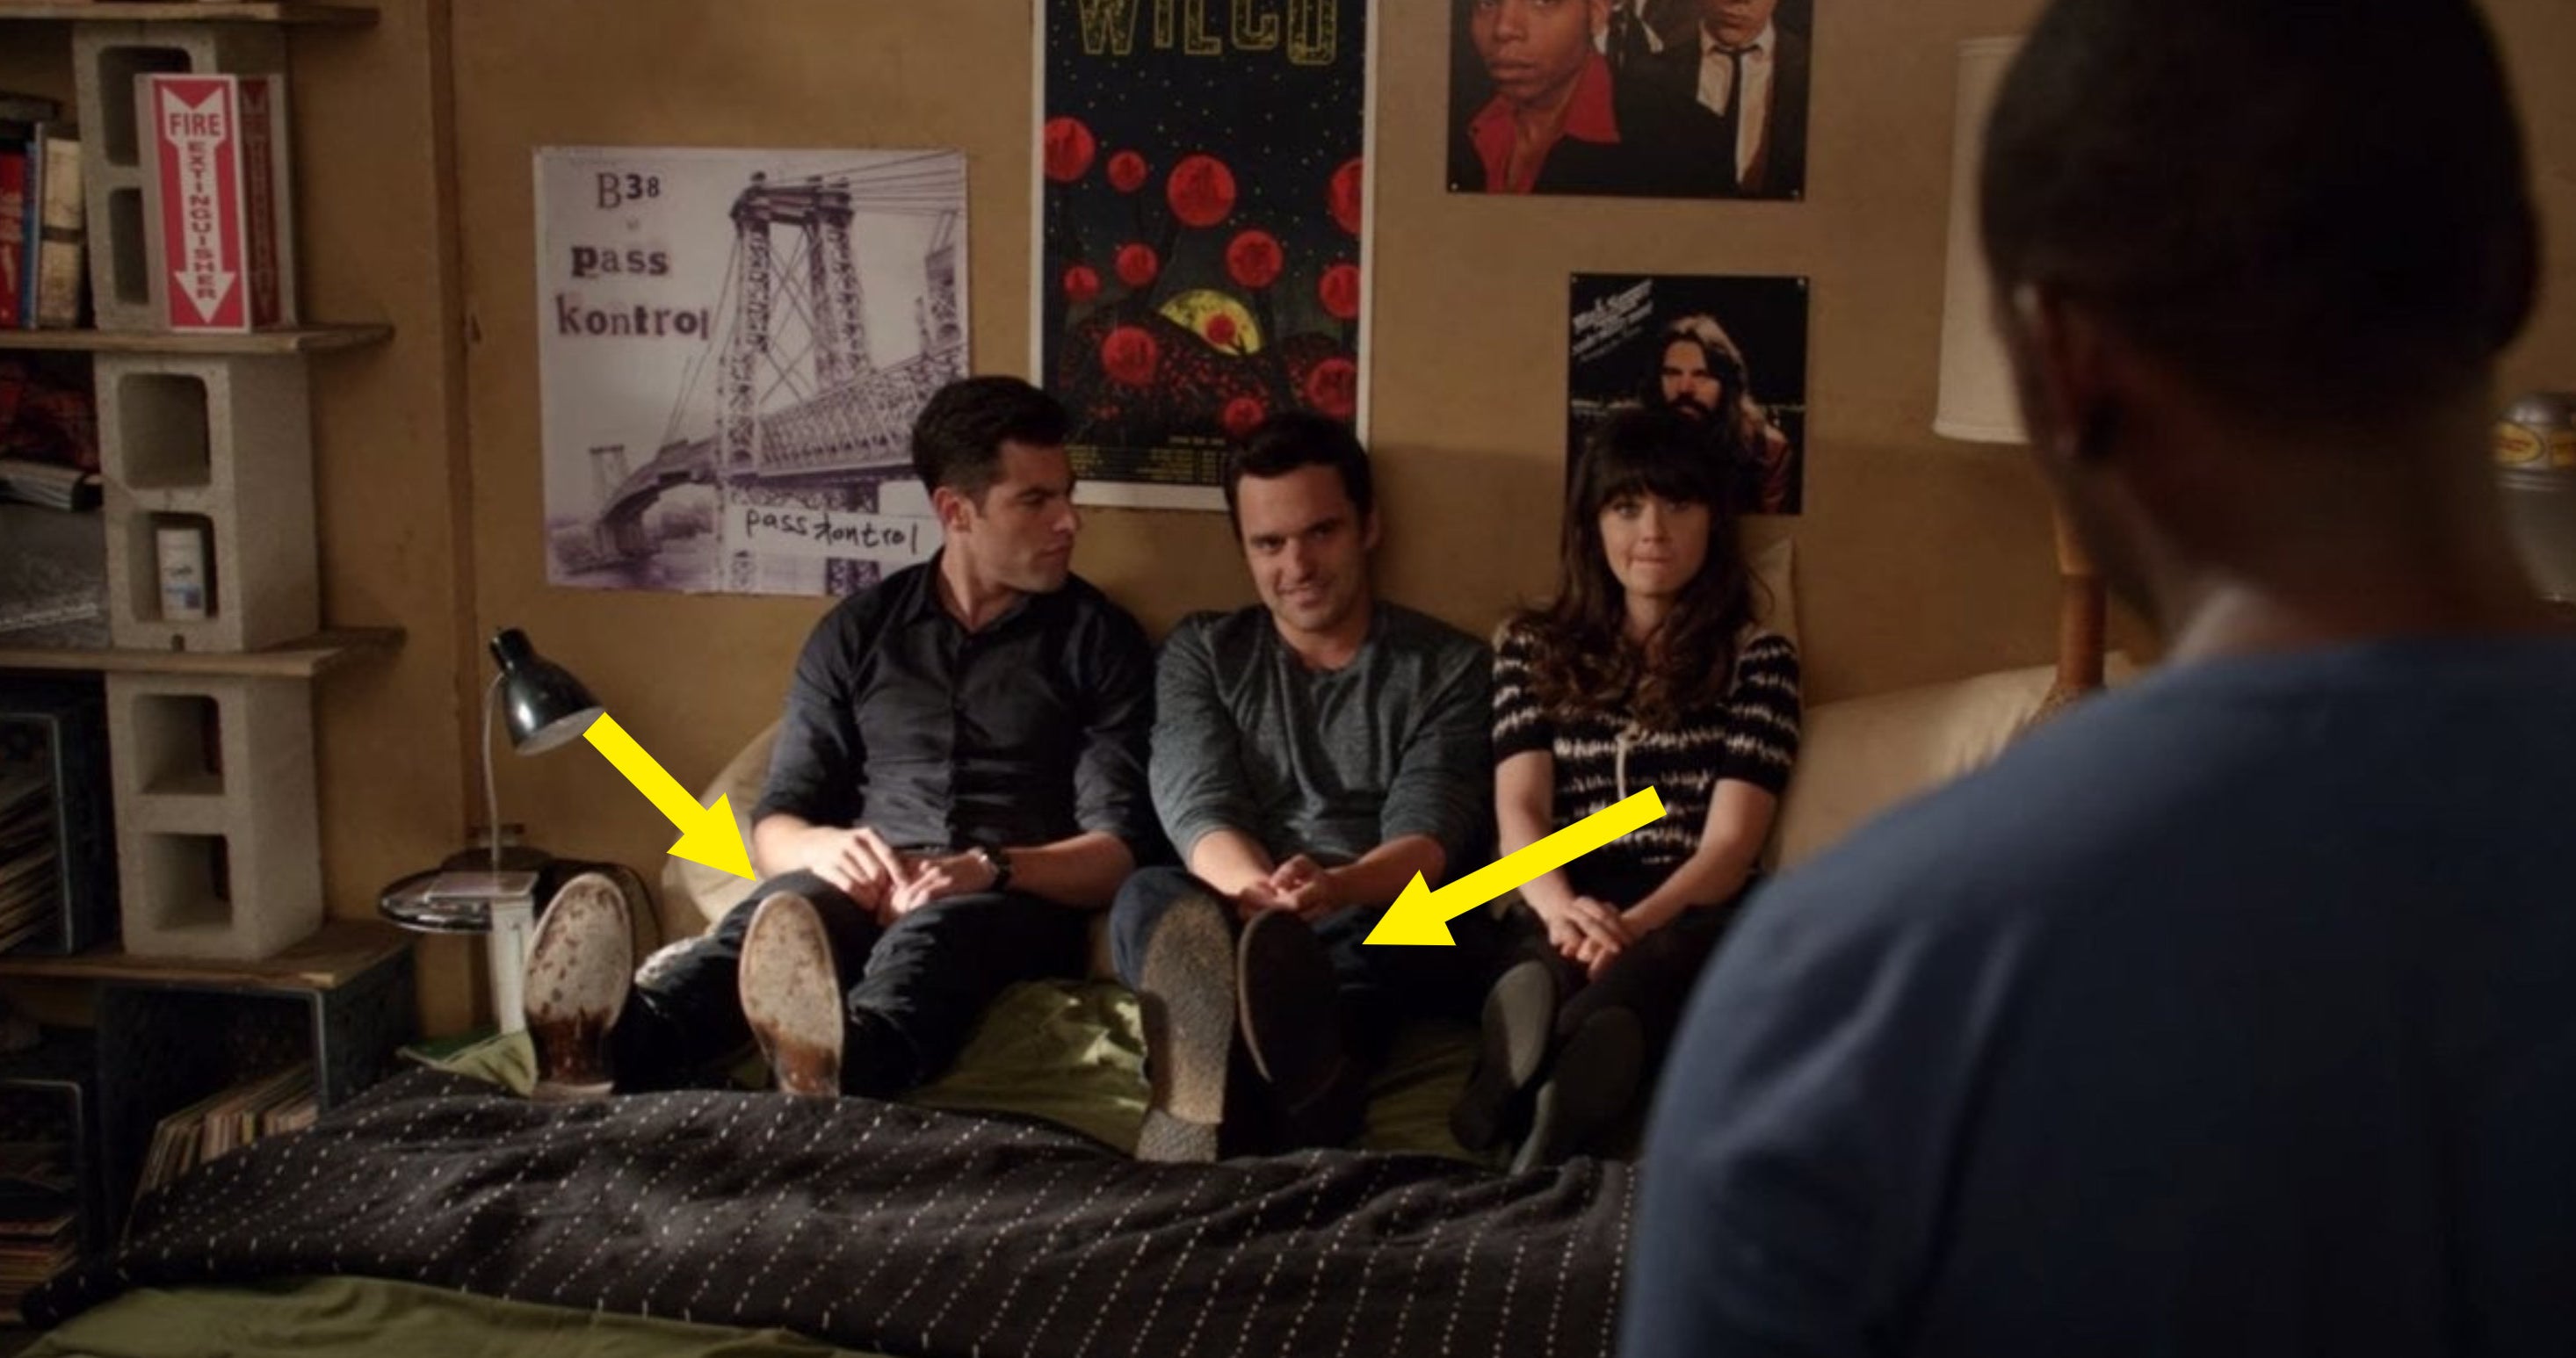 Schmidt, Nick, and Jess sitting on a bed while wearing their shoes